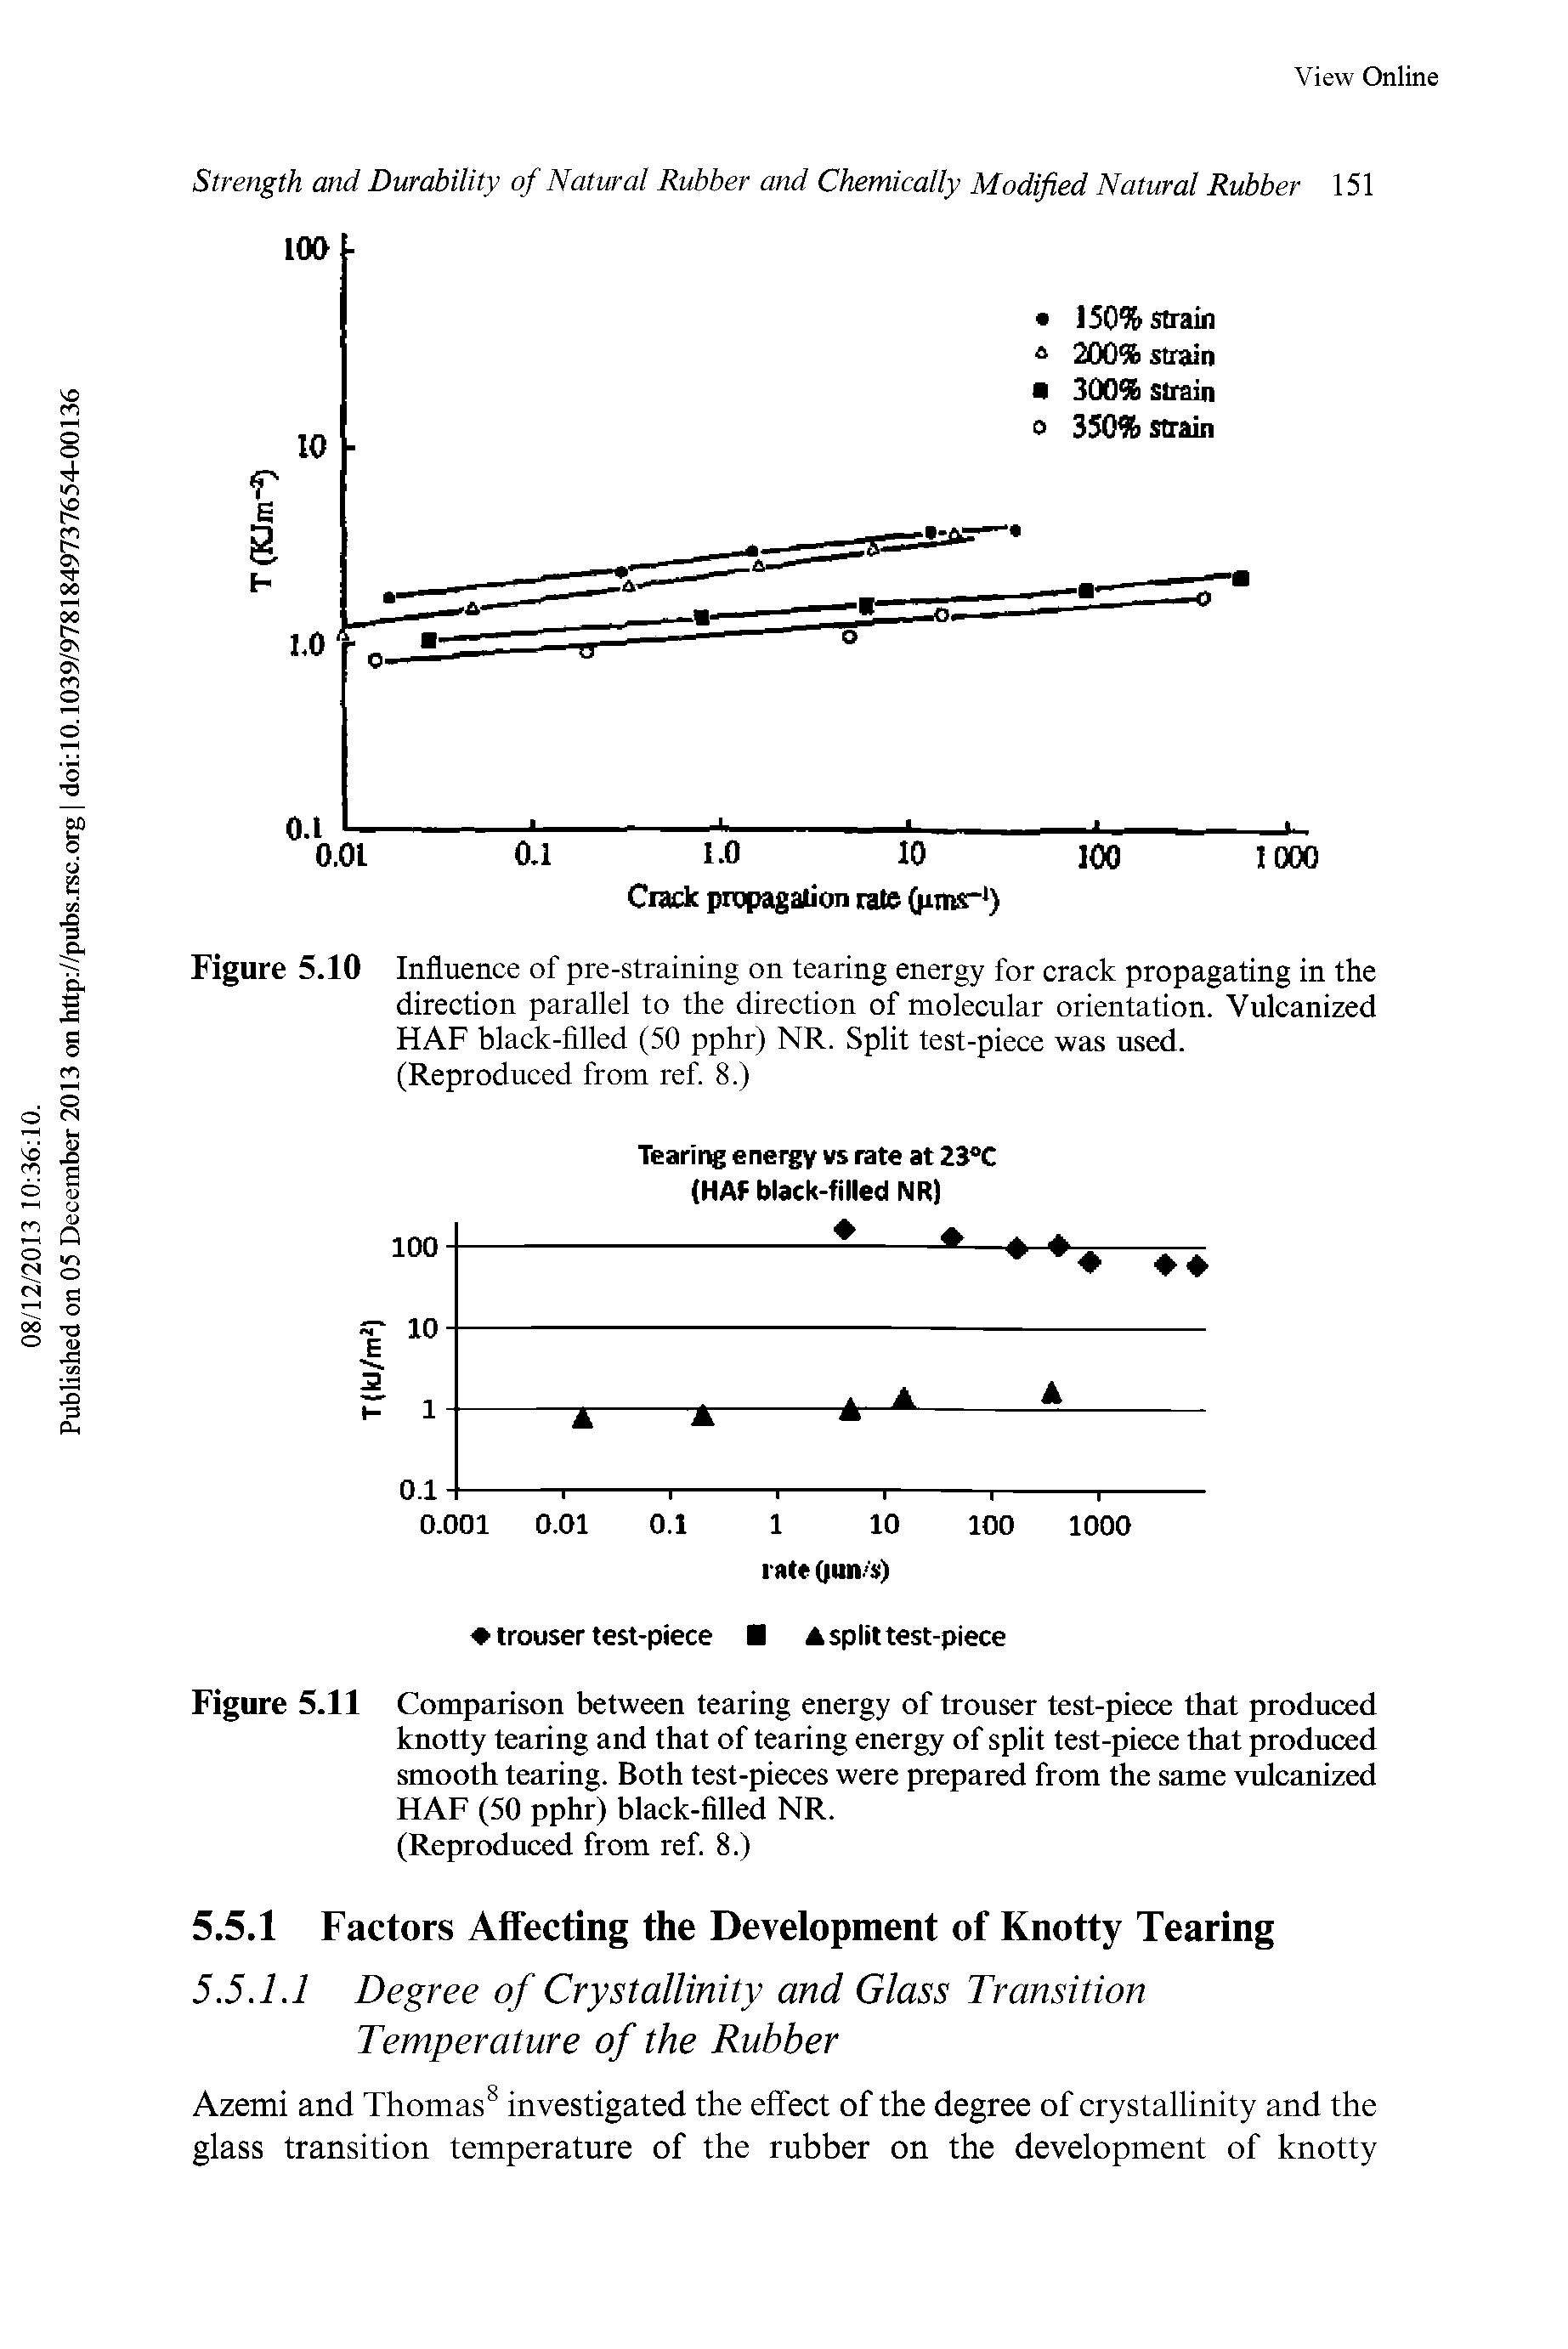 Figure 5.11 Comparison between tearing energy of trouser test-piece that produced knotty tearing and that of tearing energy of split test-piece that produced smooth tearing. Both test-pieces were prepared from the same vulcanized HAF (50 pphr) black-filled NR.